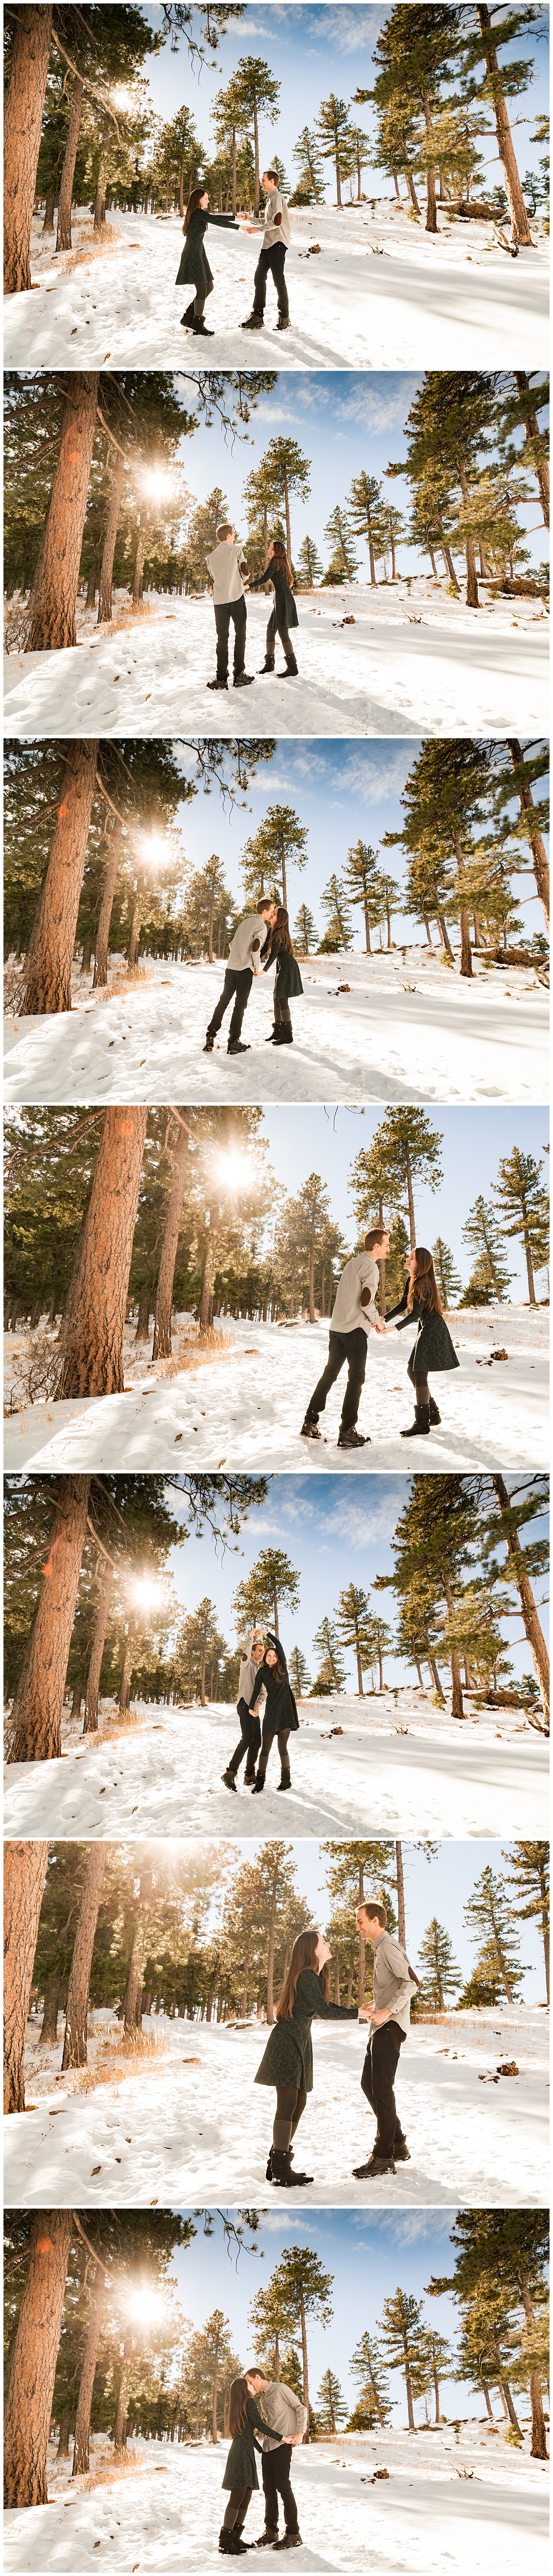 colorado engagement session at mount falcon park snowy